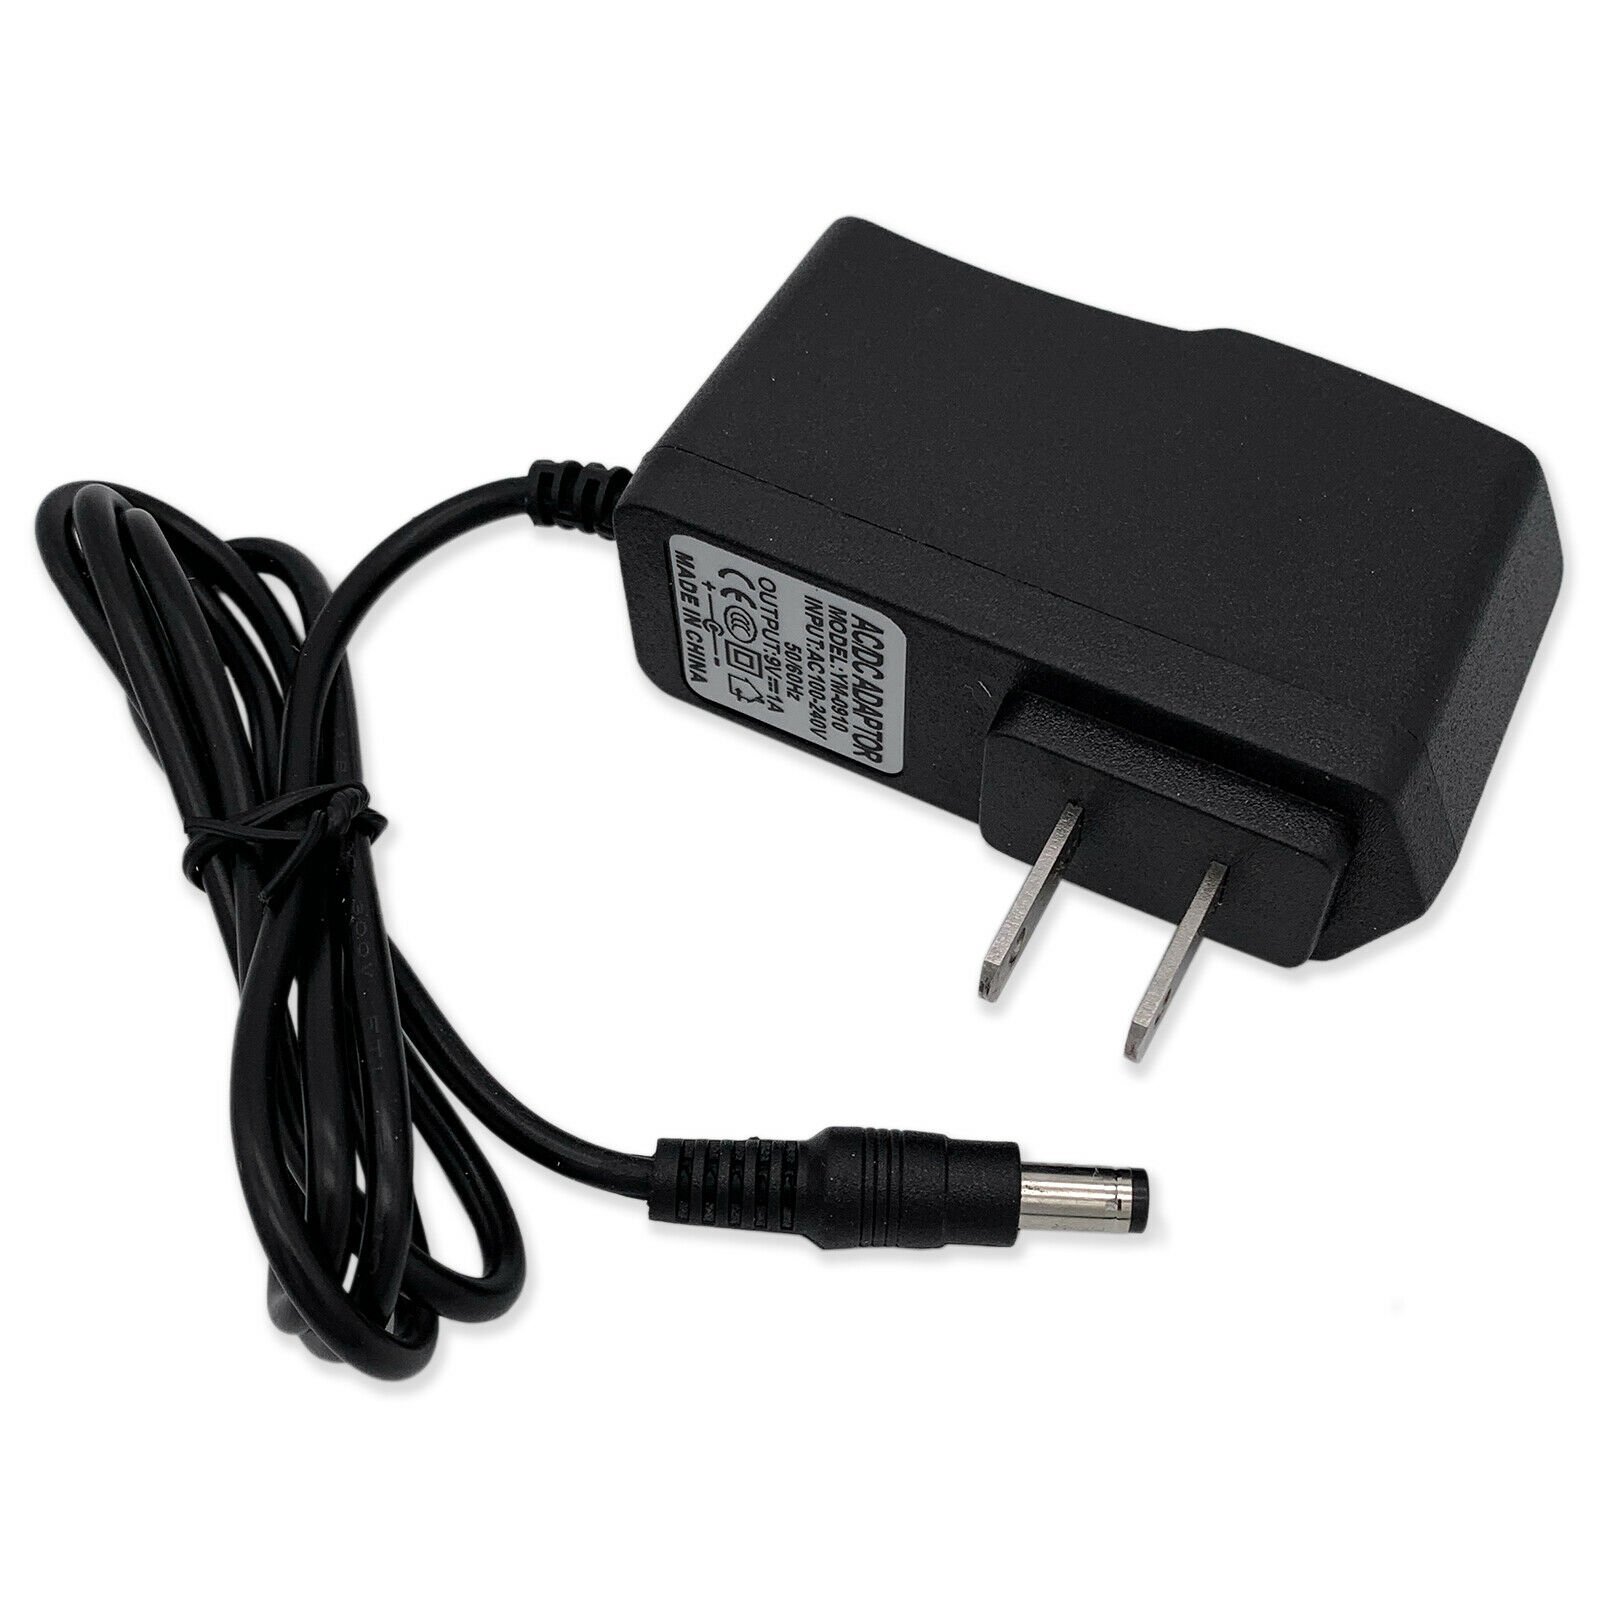 Vtech Toy Transformer Charger AC Adapter Power Supply S004LAU0750065 7.5V 4.9W Type: AC Adapter MP